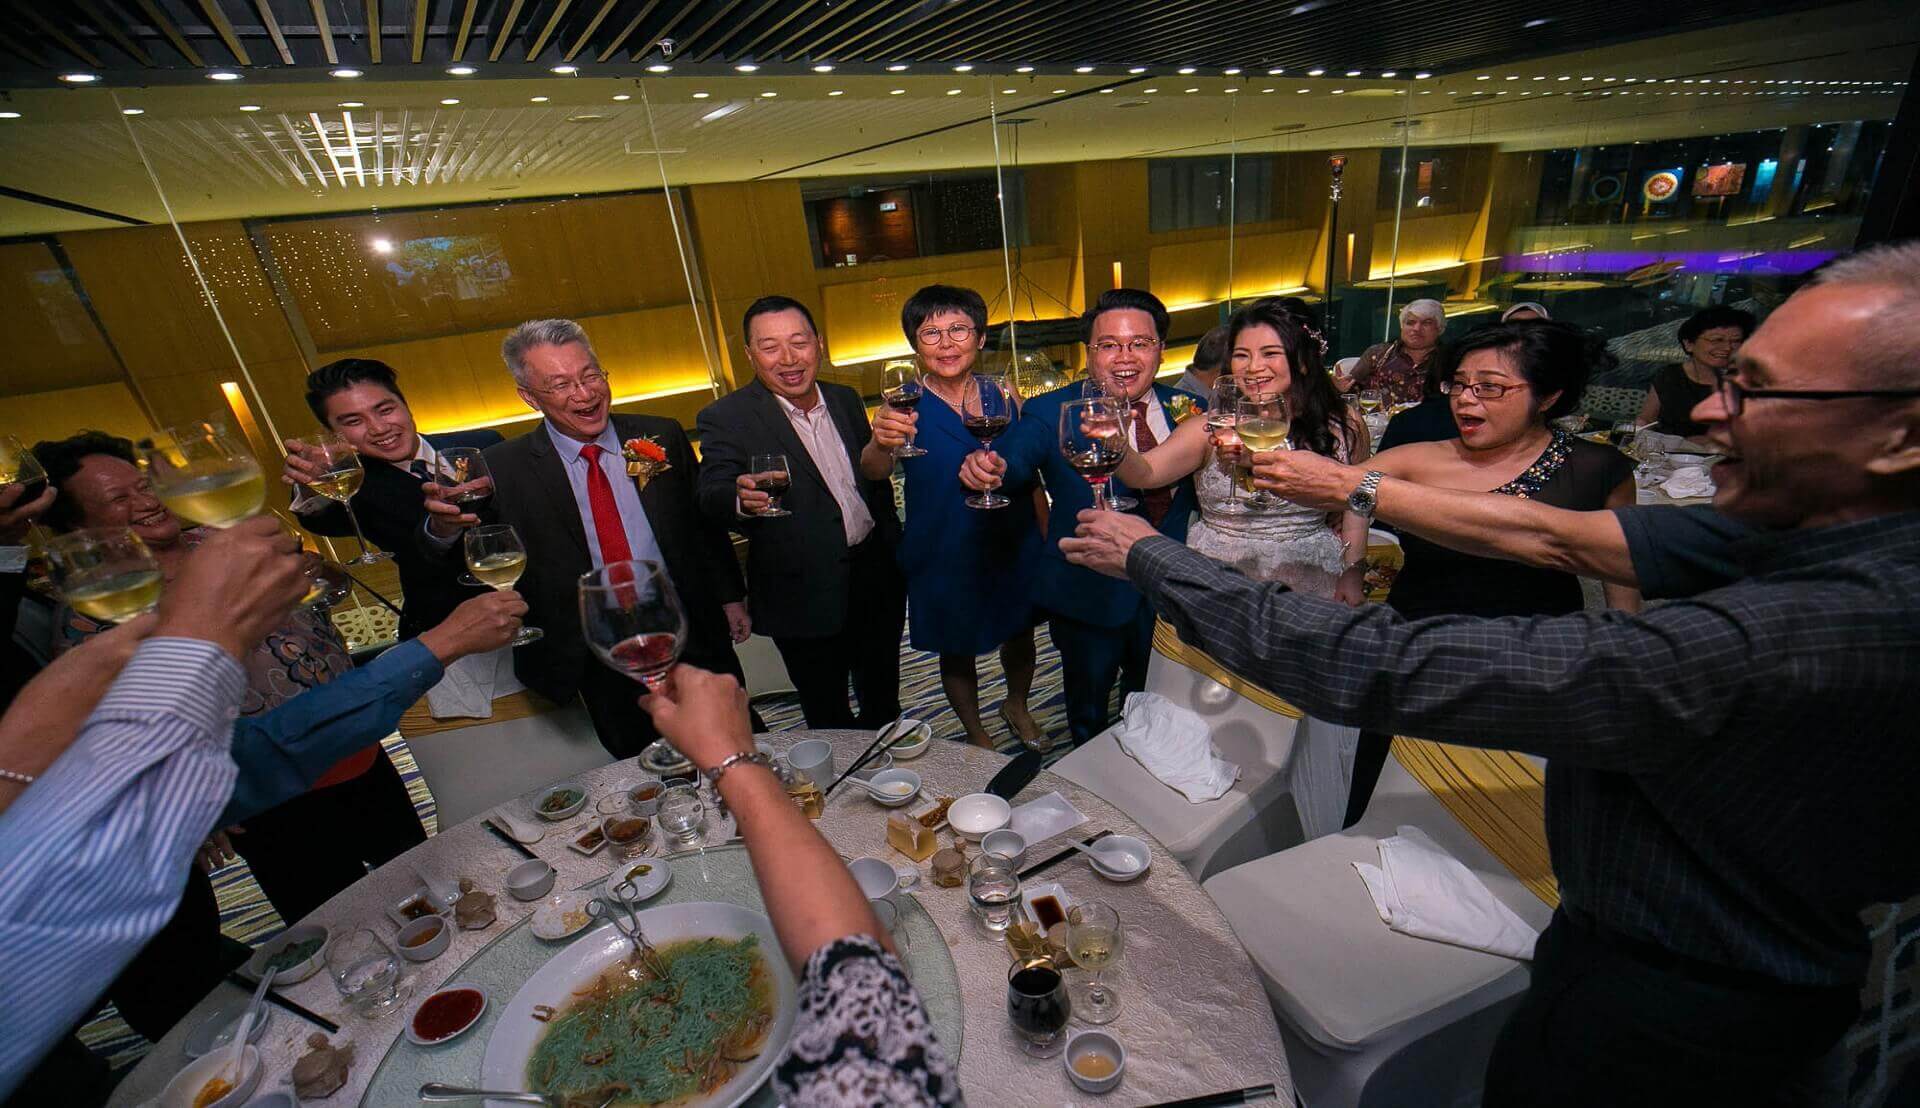 Sugar & Spice Events - Wedding banquet toasting the newly wed couple